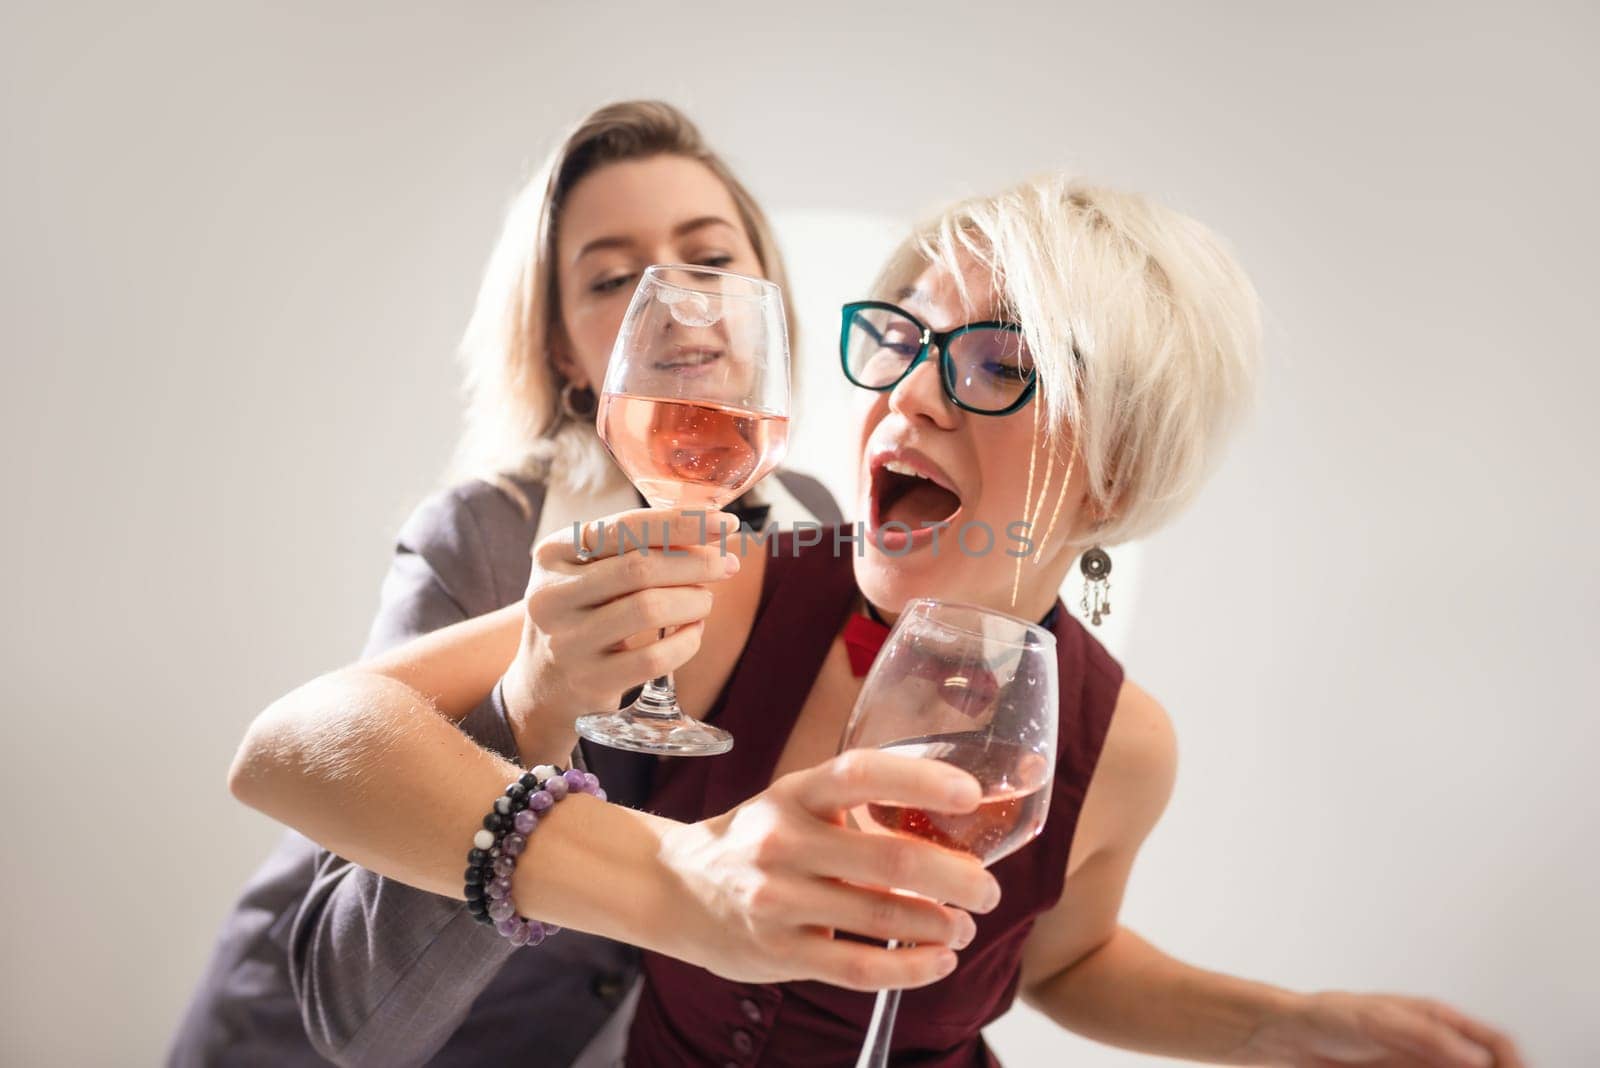 two close girlfriends with glasses of alcohol having fun laughing at a party in the studio on a white background copy paste by Rotozey